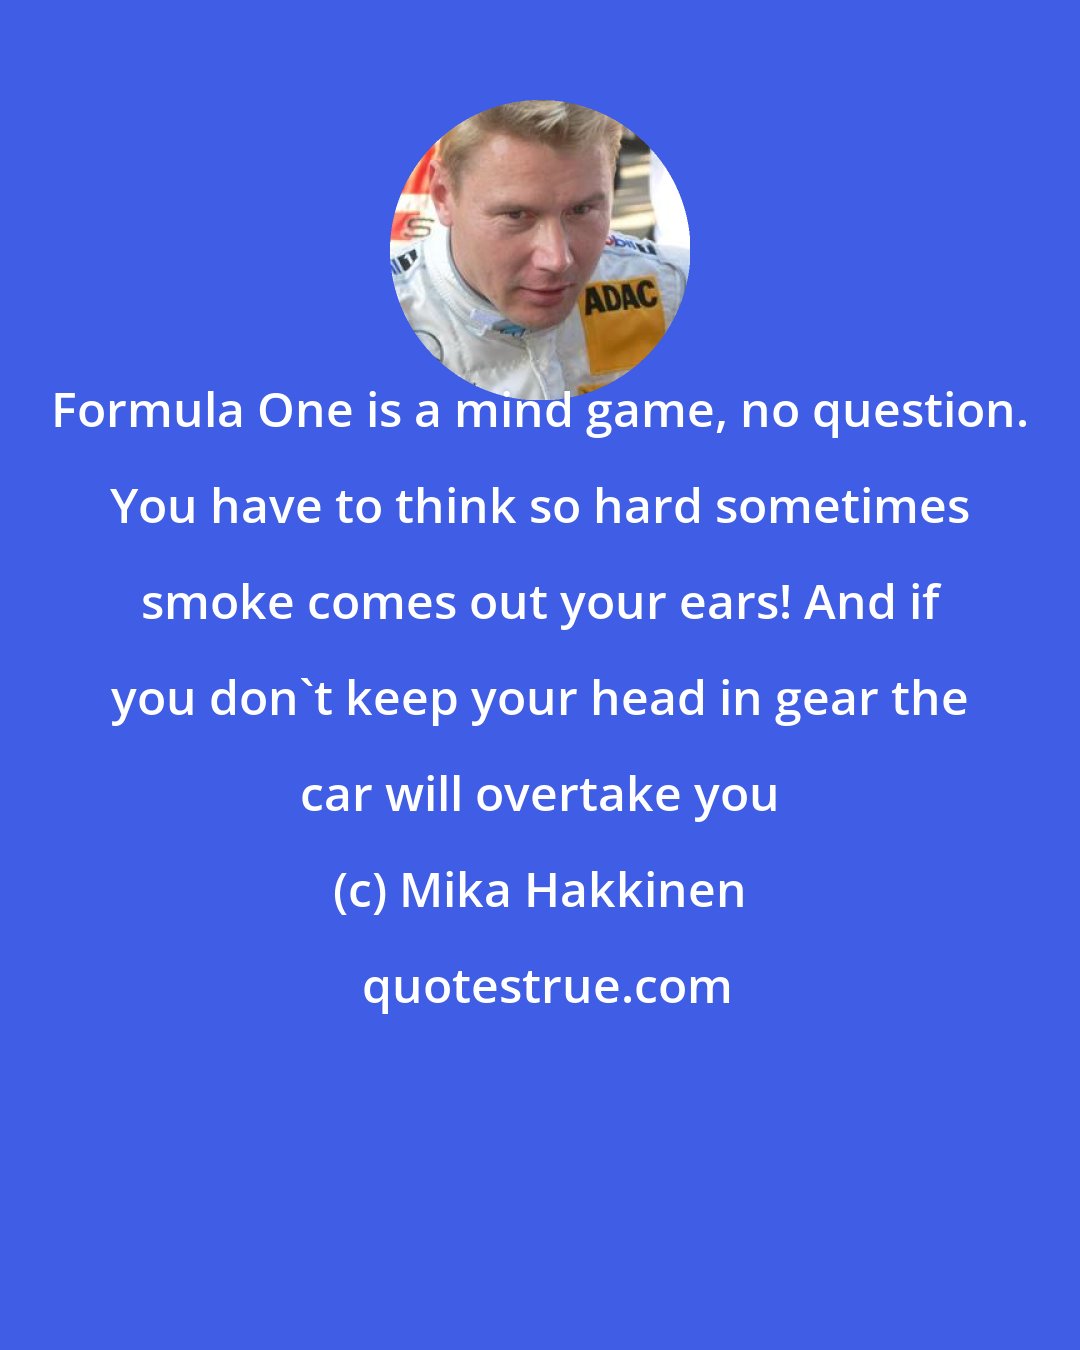 Mika Hakkinen: Formula One is a mind game, no question. You have to think so hard sometimes smoke comes out your ears! And if you don't keep your head in gear the car will overtake you